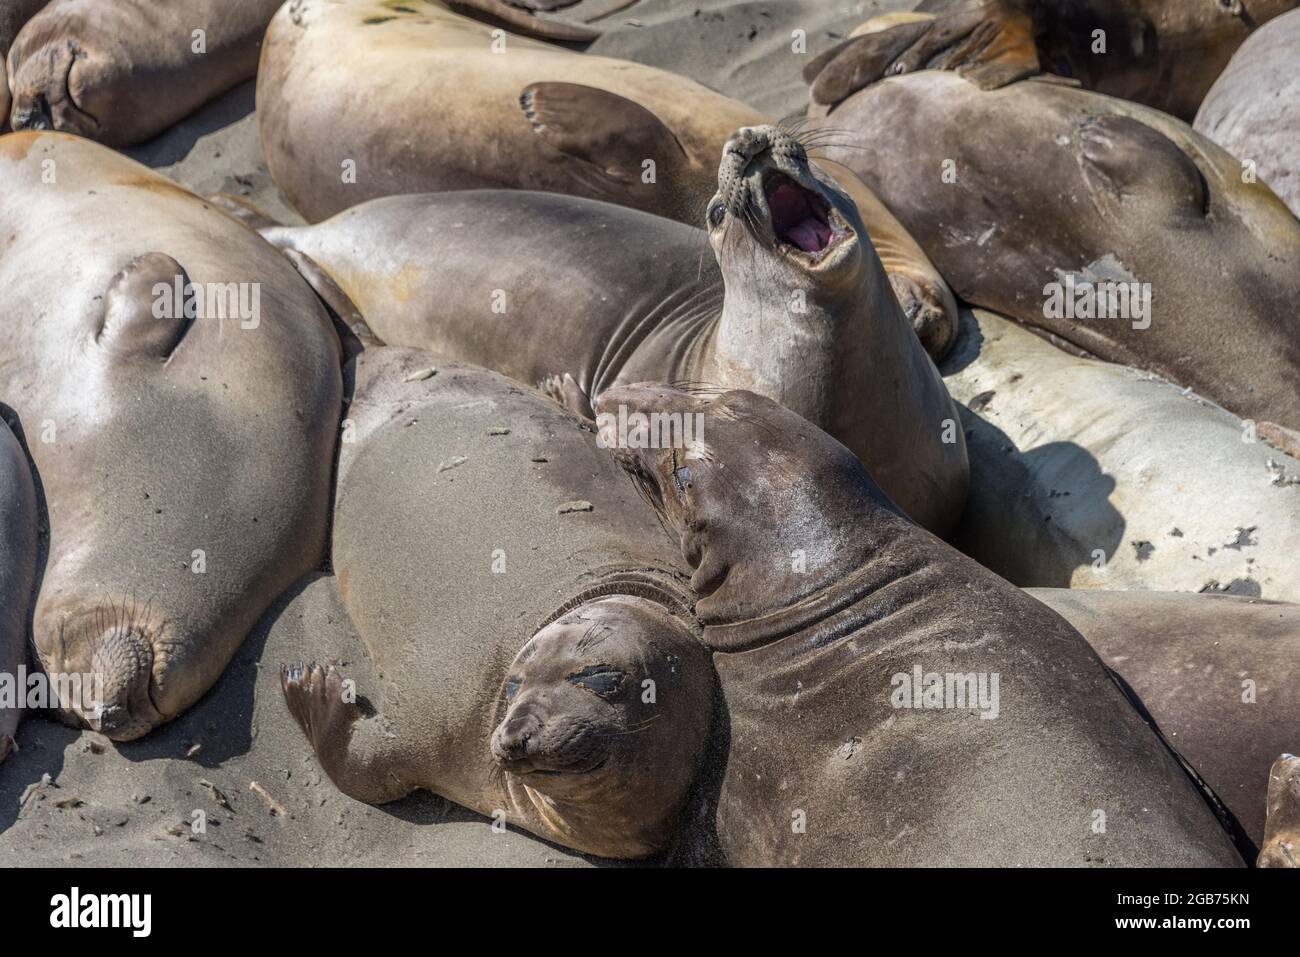 A loud mouth juvenile elephant seal barks as others beside him rest, one appears to find it humorous by the look on her face. Piedras Blancas rookery. Stock Photo